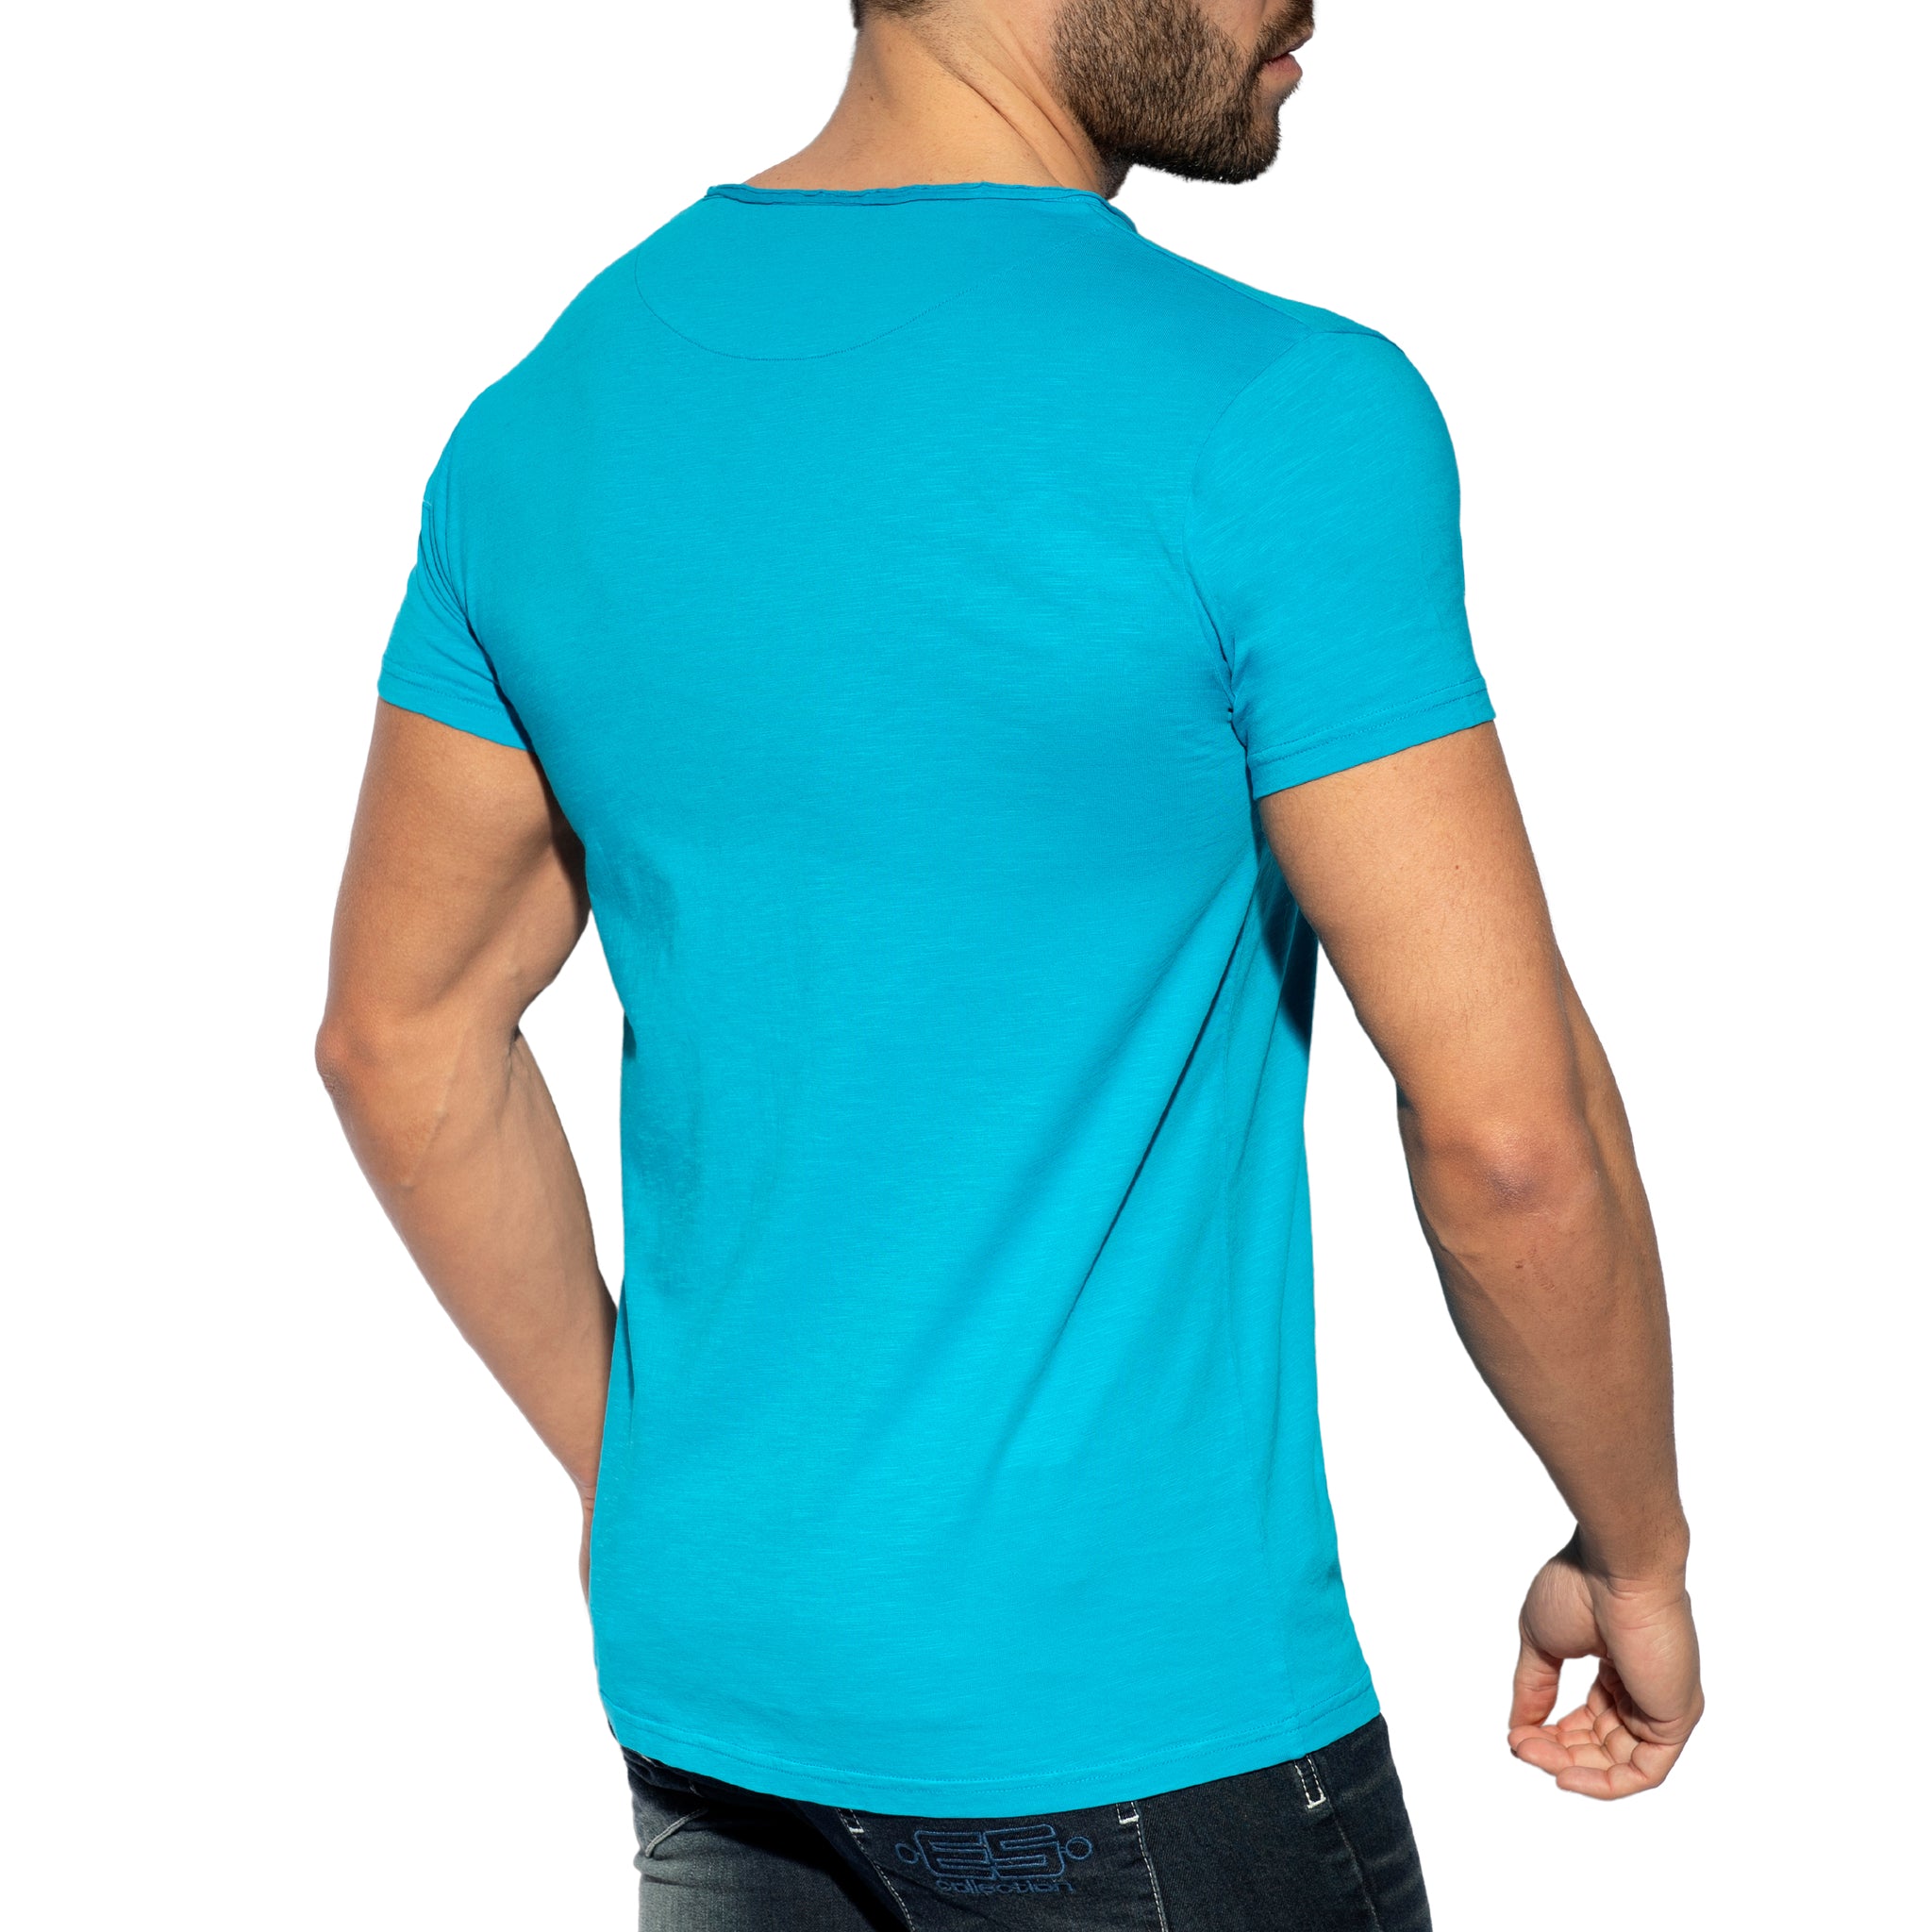 ES Collection Flame Luxury T-Shirt Turquoise TS305